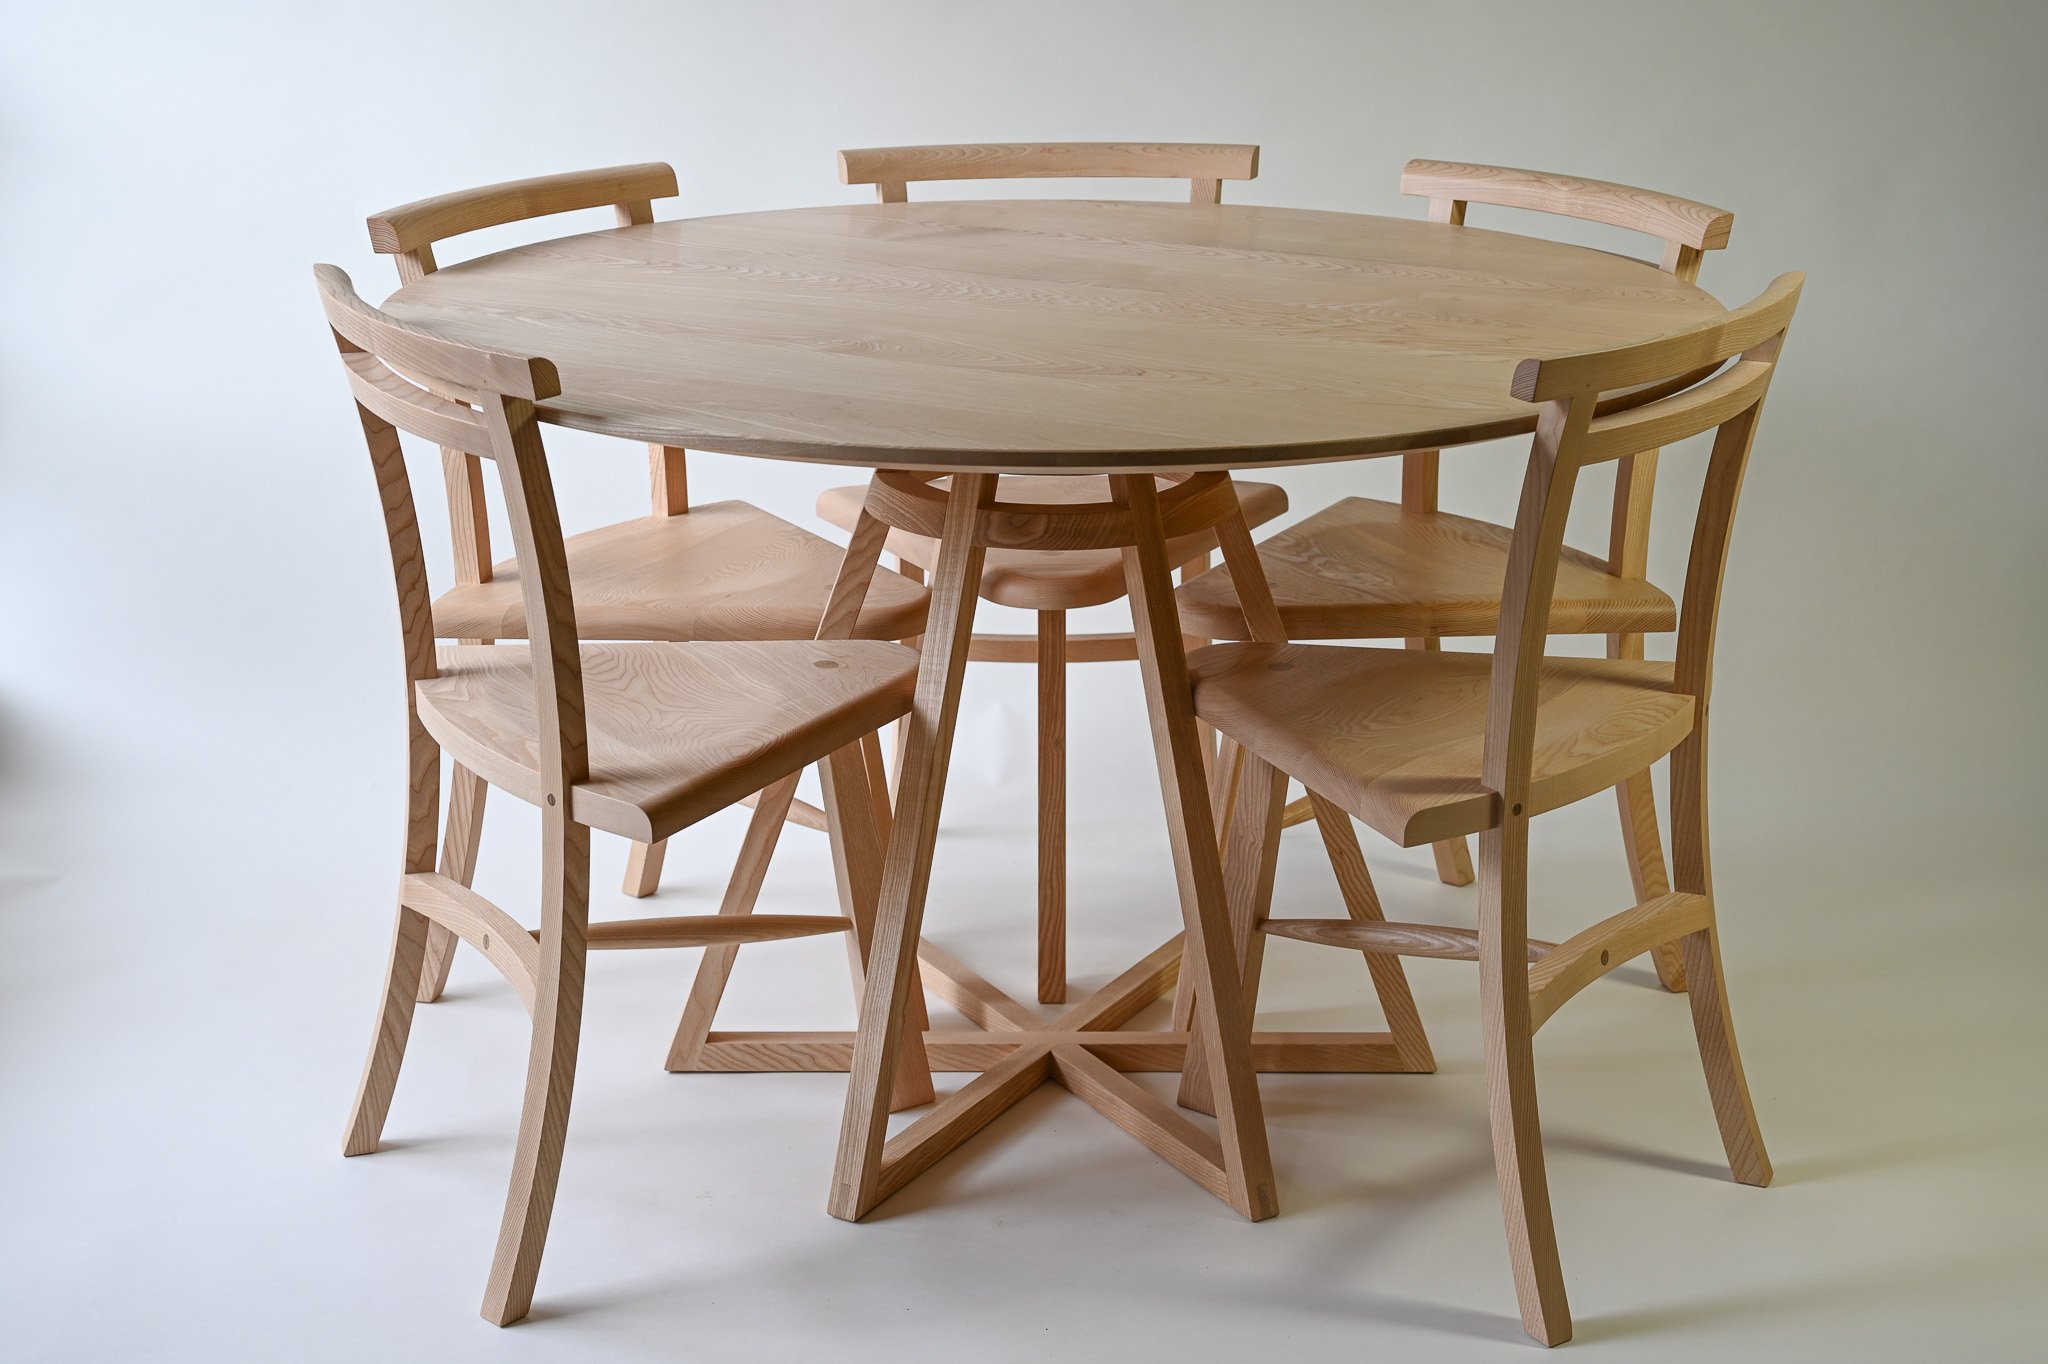 About 5 | Angus Ross | Designer and bespoke furniture made in Scotland